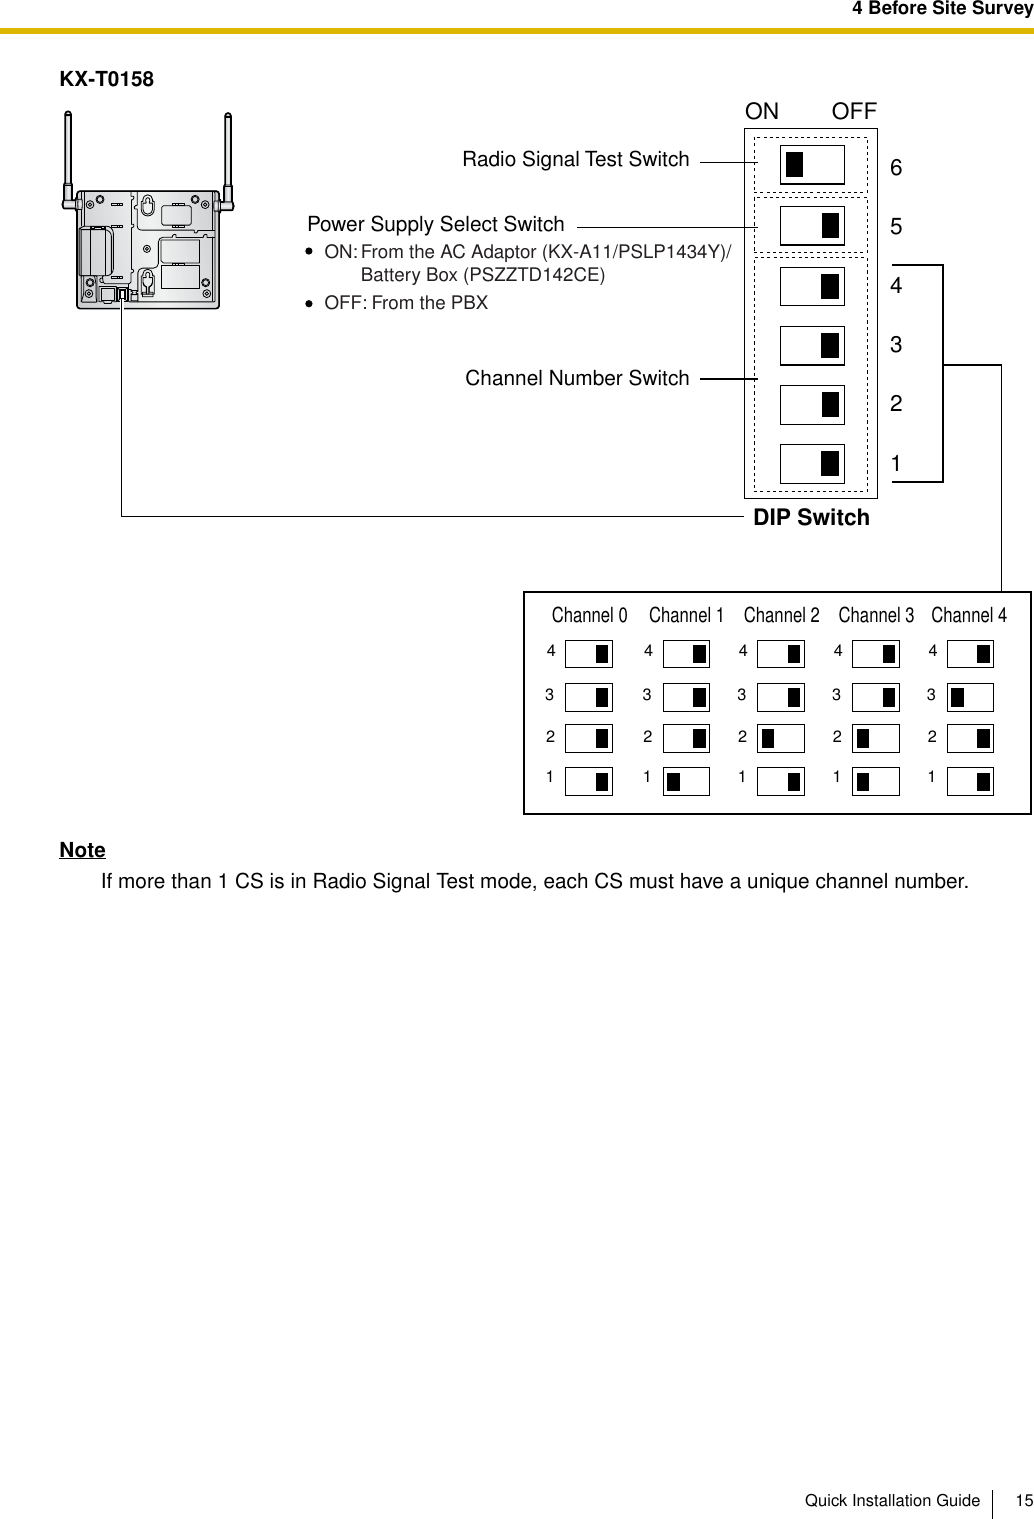 4 Before Site SurveyQuick Installation Guide 15KX-T0158NoteIf more than 1 CS is in Radio Signal Test mode, each CS must have a unique channel number.65432143214321432143214321DIP SwitchRadio Signal Test SwitchPower Supply Select SwitchChannel Number SwitchChannel 1 Channel 2 Channel 3 Channel 4Channel 0ON OFFON: From the AC Adaptor (KX-A11/PSLP1434Y)/Battery Box (PSZZTD142CE)OFF: From the PBX